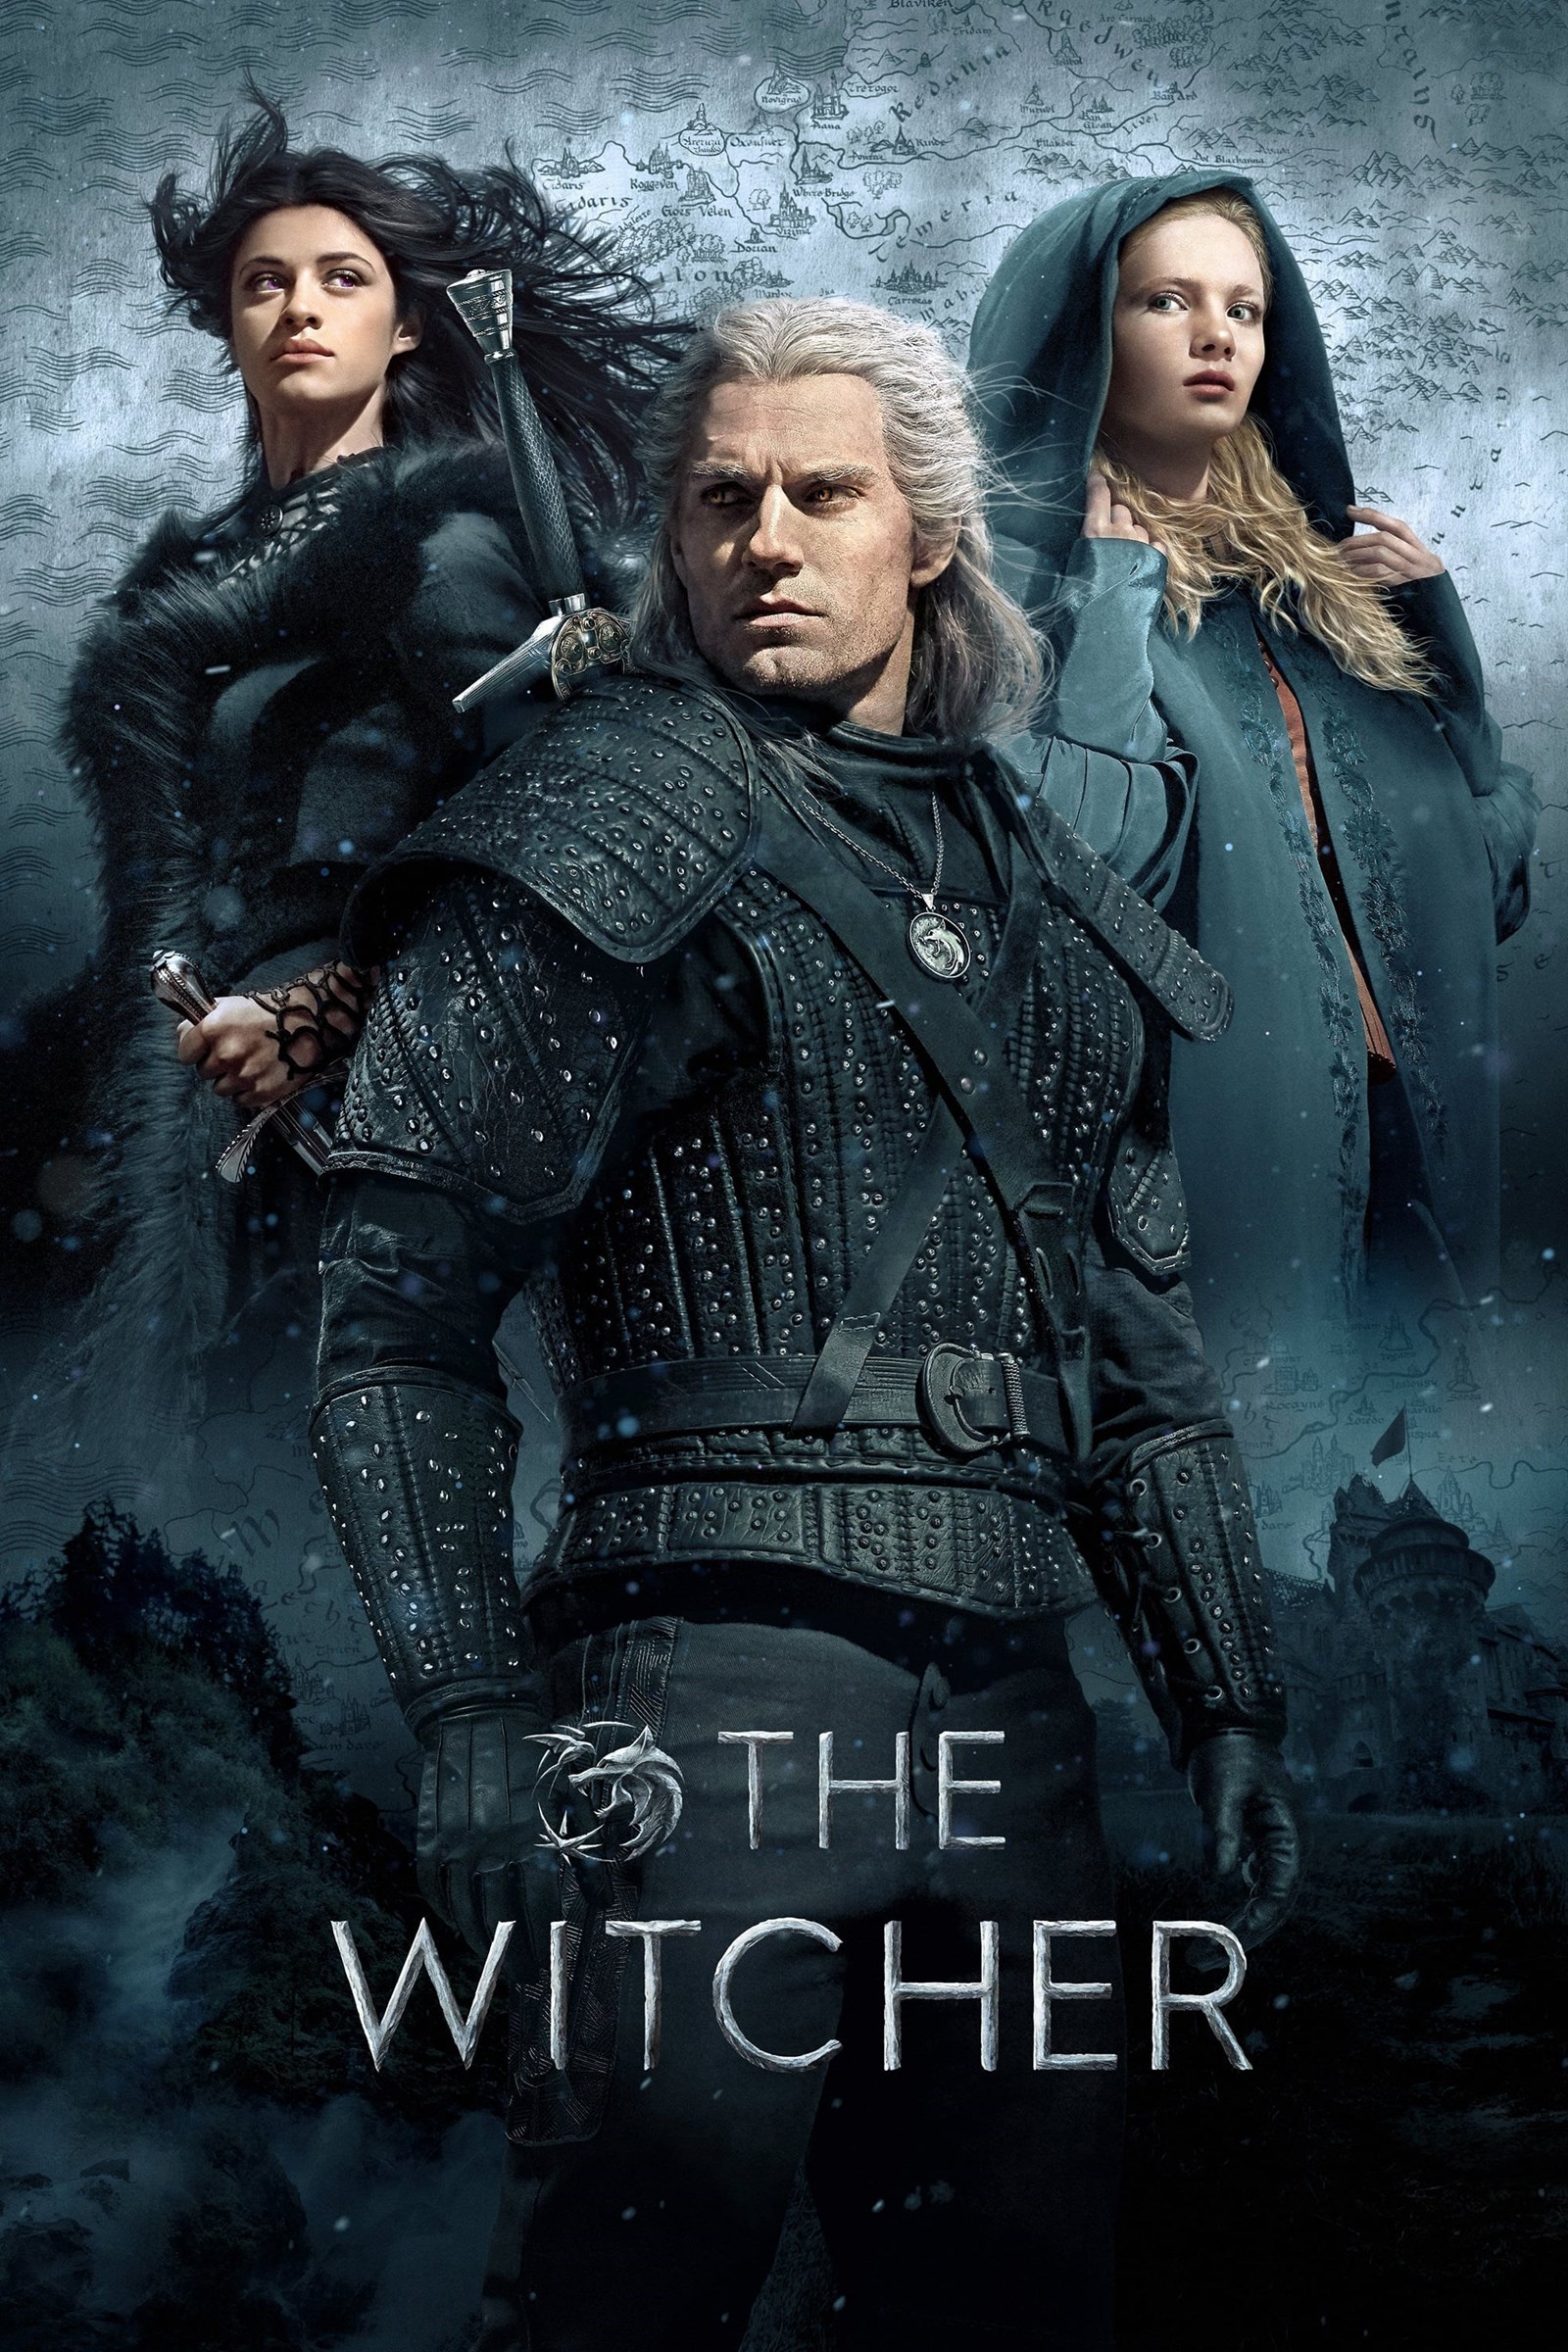 The Witcher Season 1 The-witcher.170269